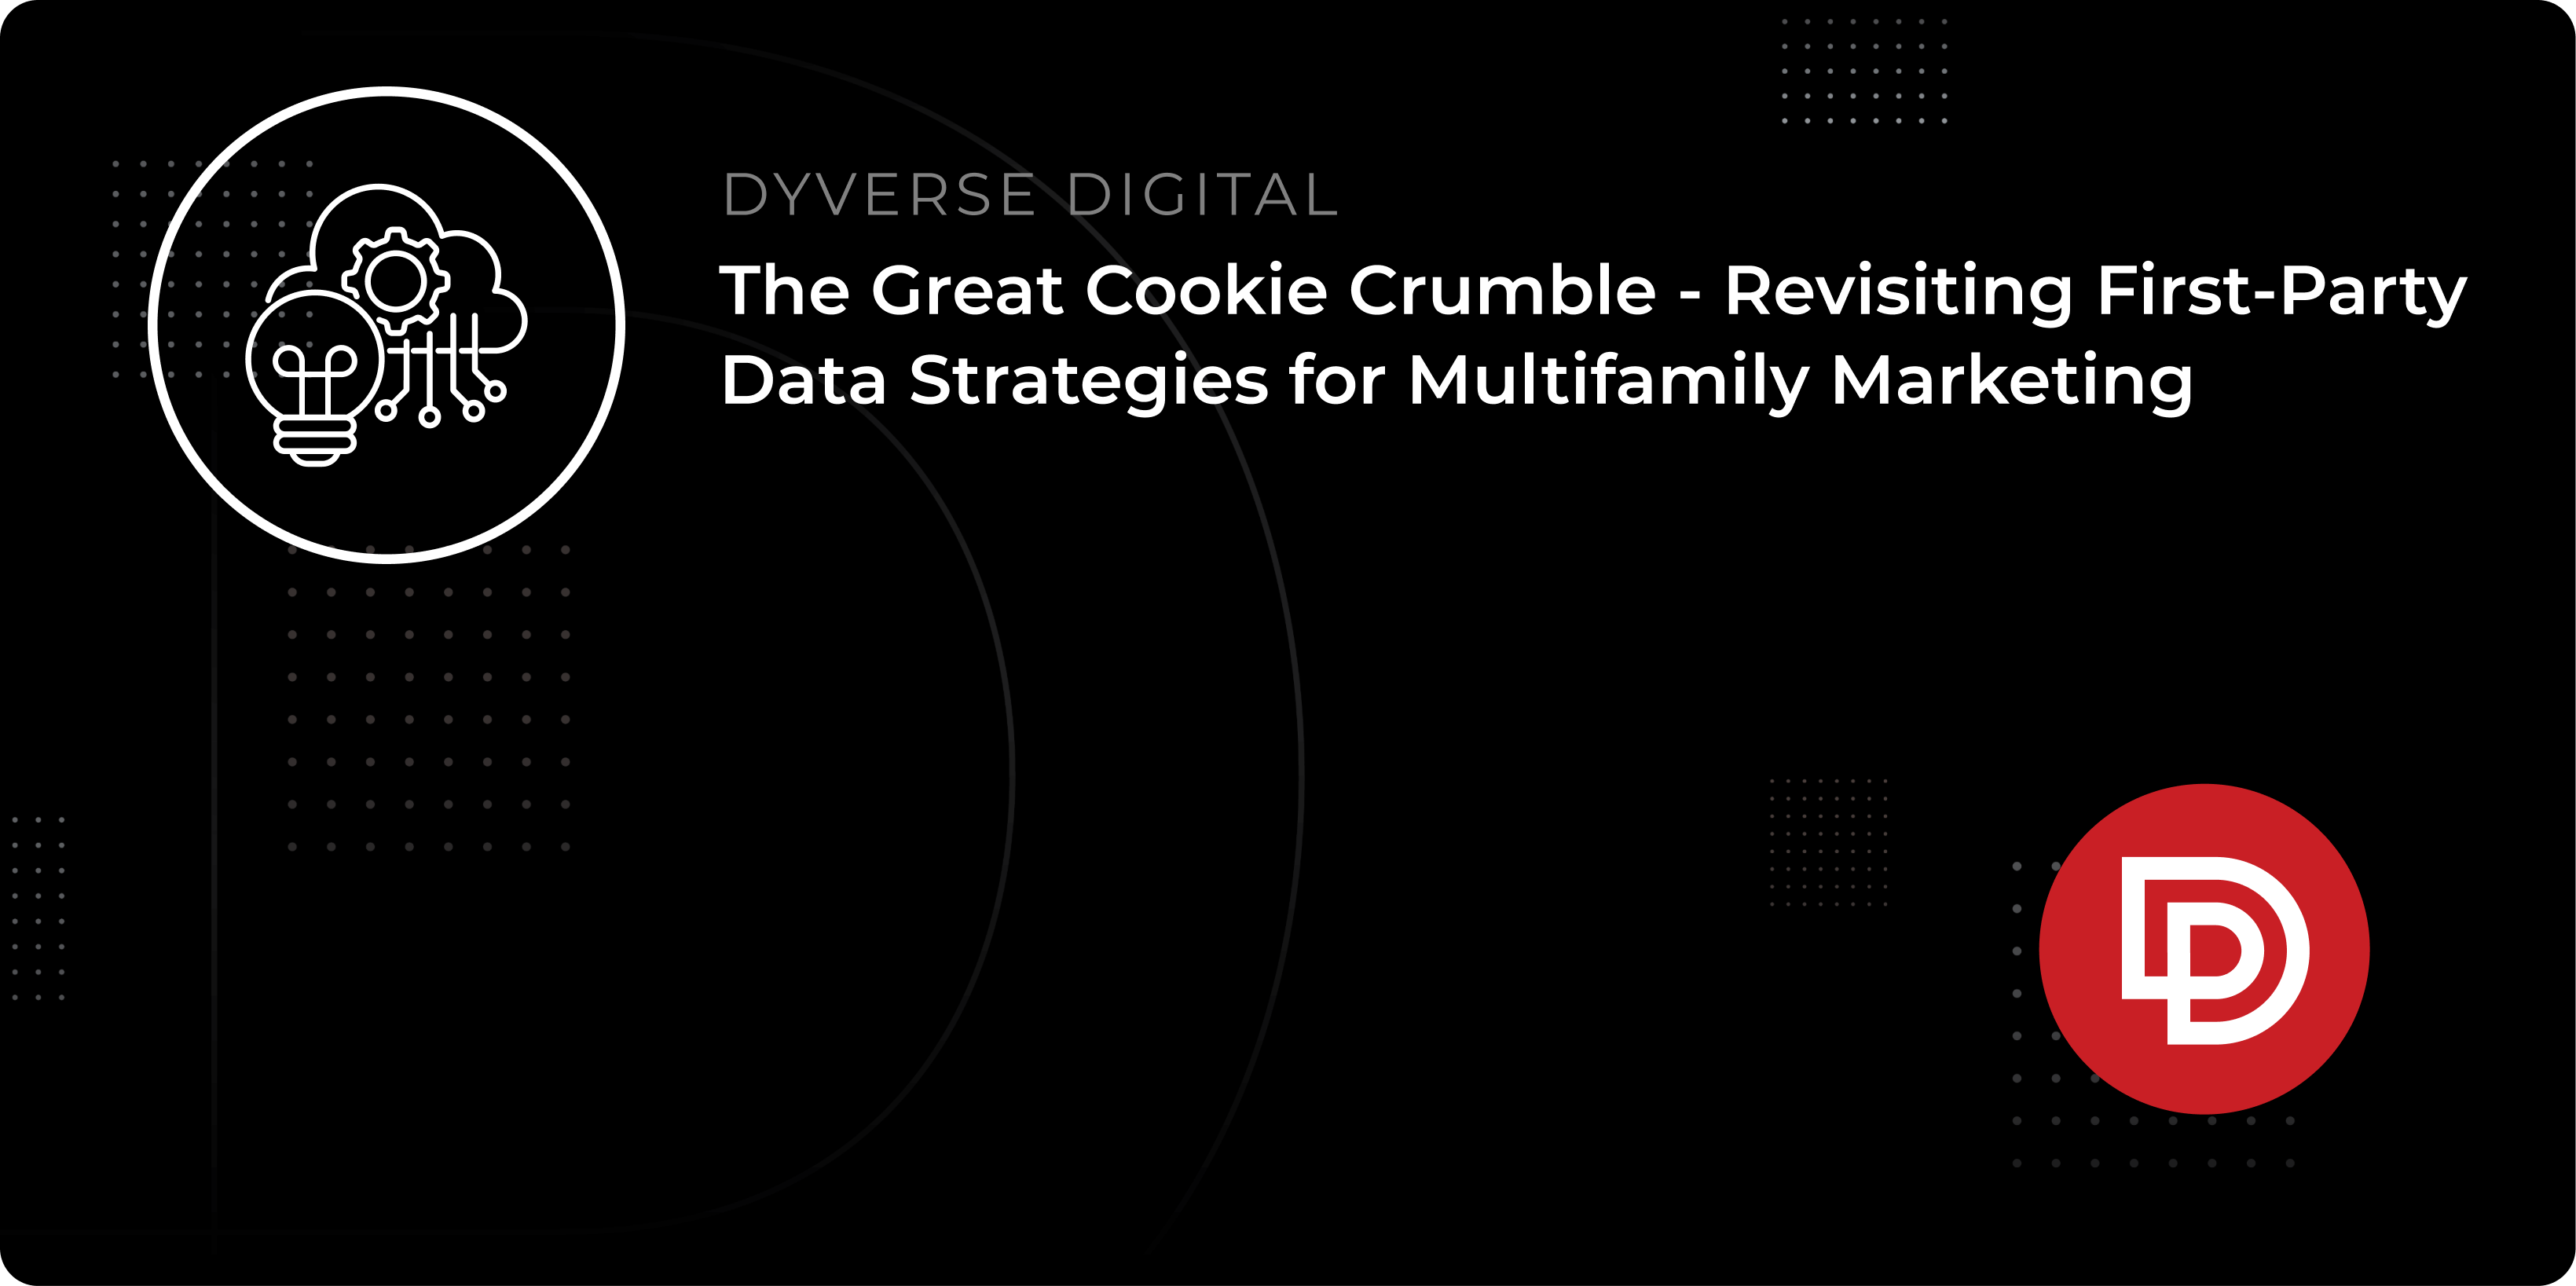 The Great Cookie Crumble - Revisiting First-Party Data Strategies for Multifamily Marketing